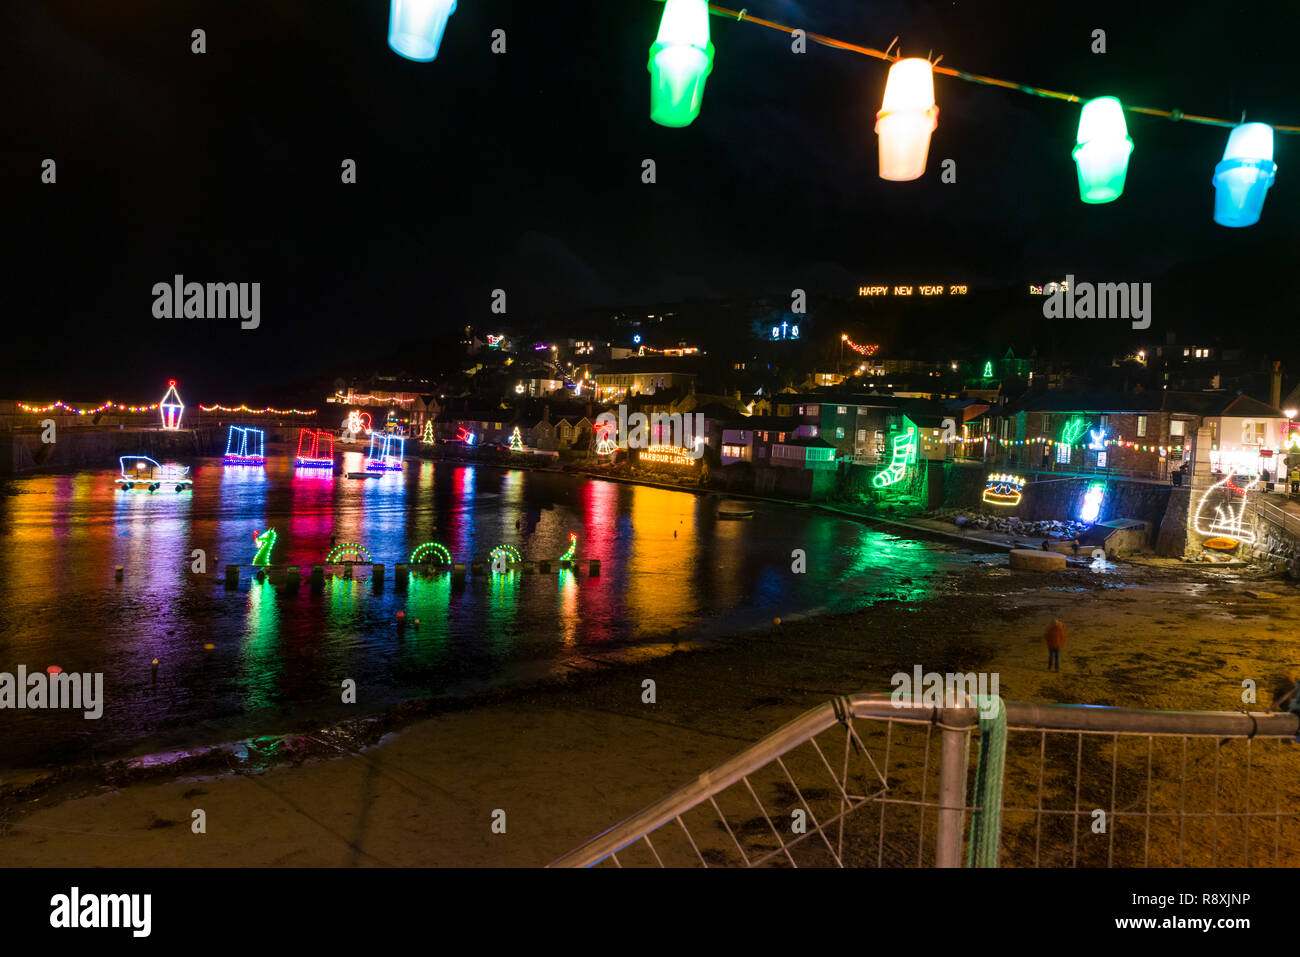 Mousehole, Cornwall, UK. 15/12/2018. Editorial: Members of the public and potential logos. Mousehole Christmas Lights switch on. Stock Photo